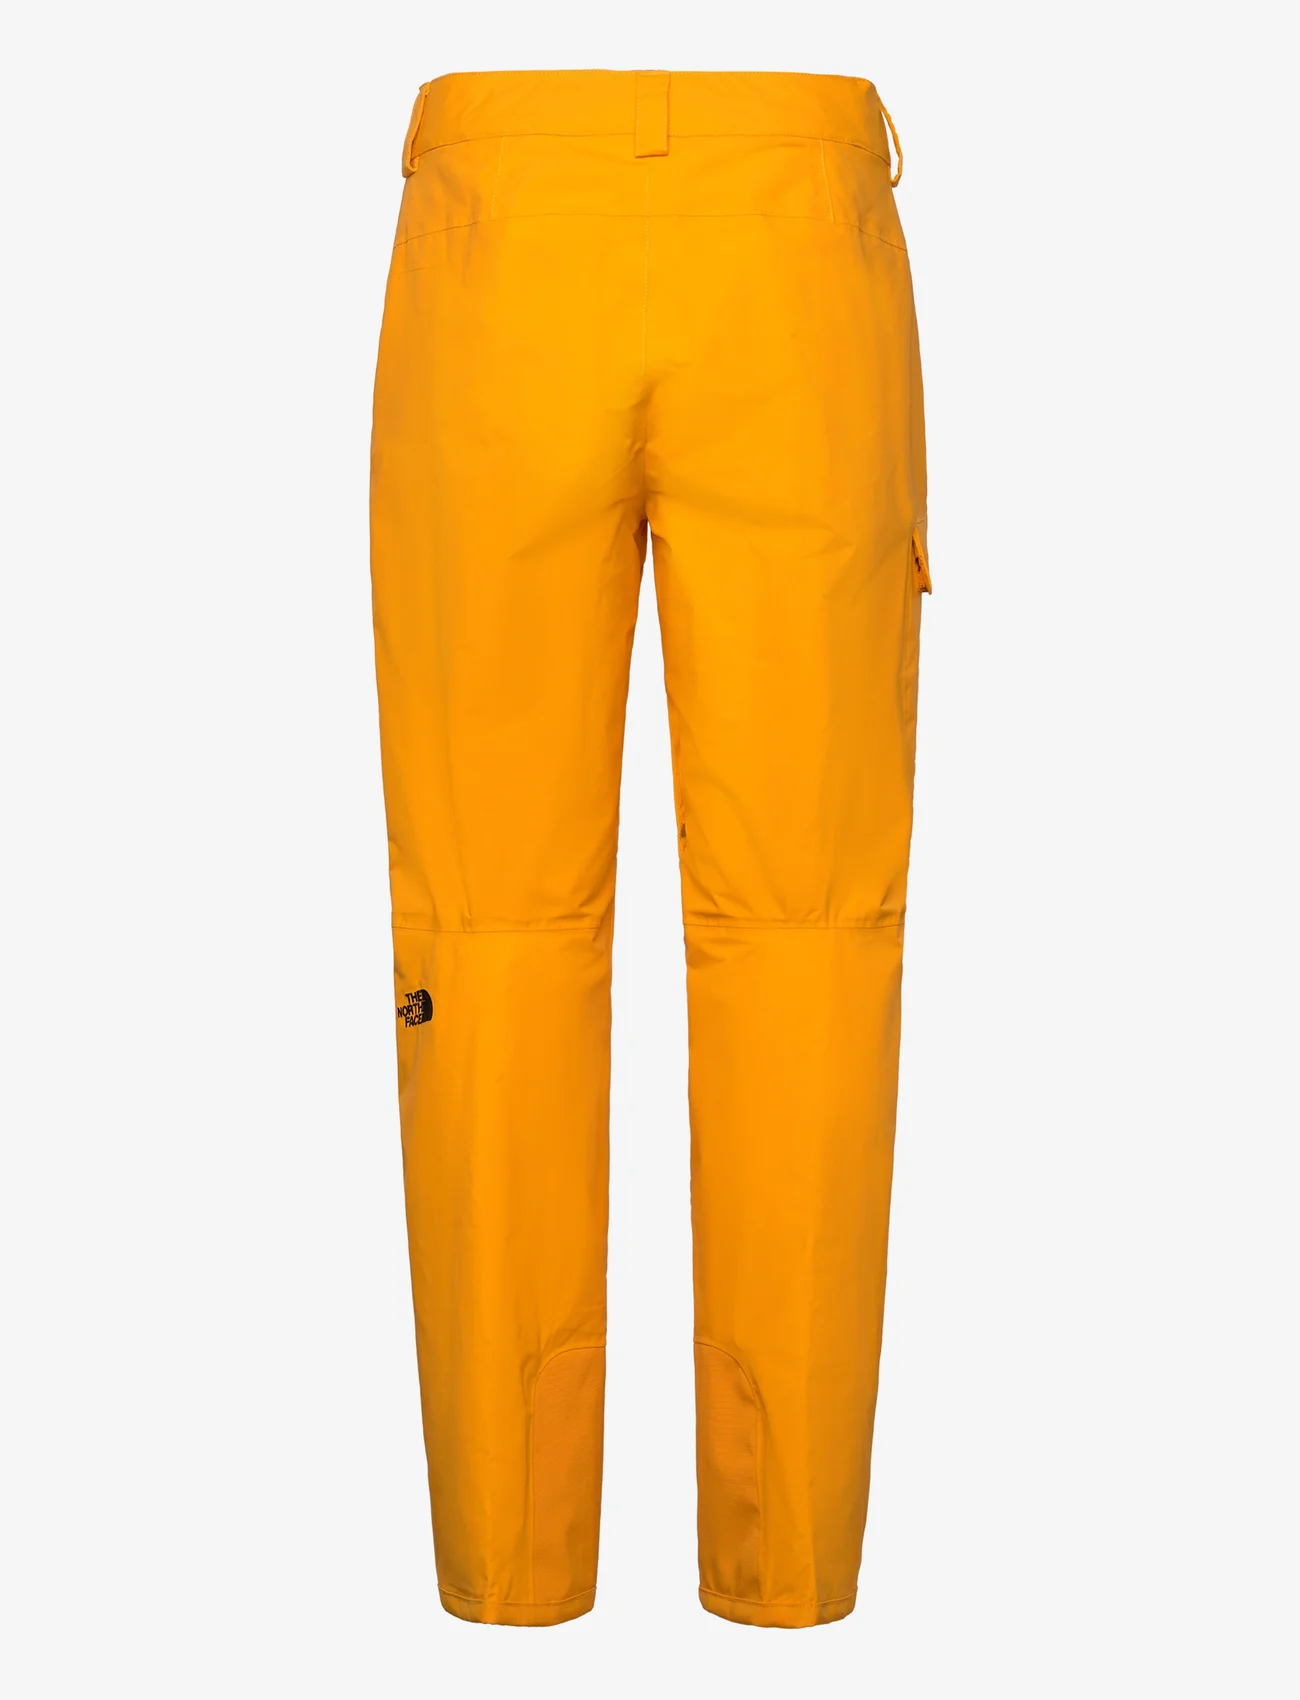 The North Face - M FREEDOM PANT - skiing pants - summit gold - 1